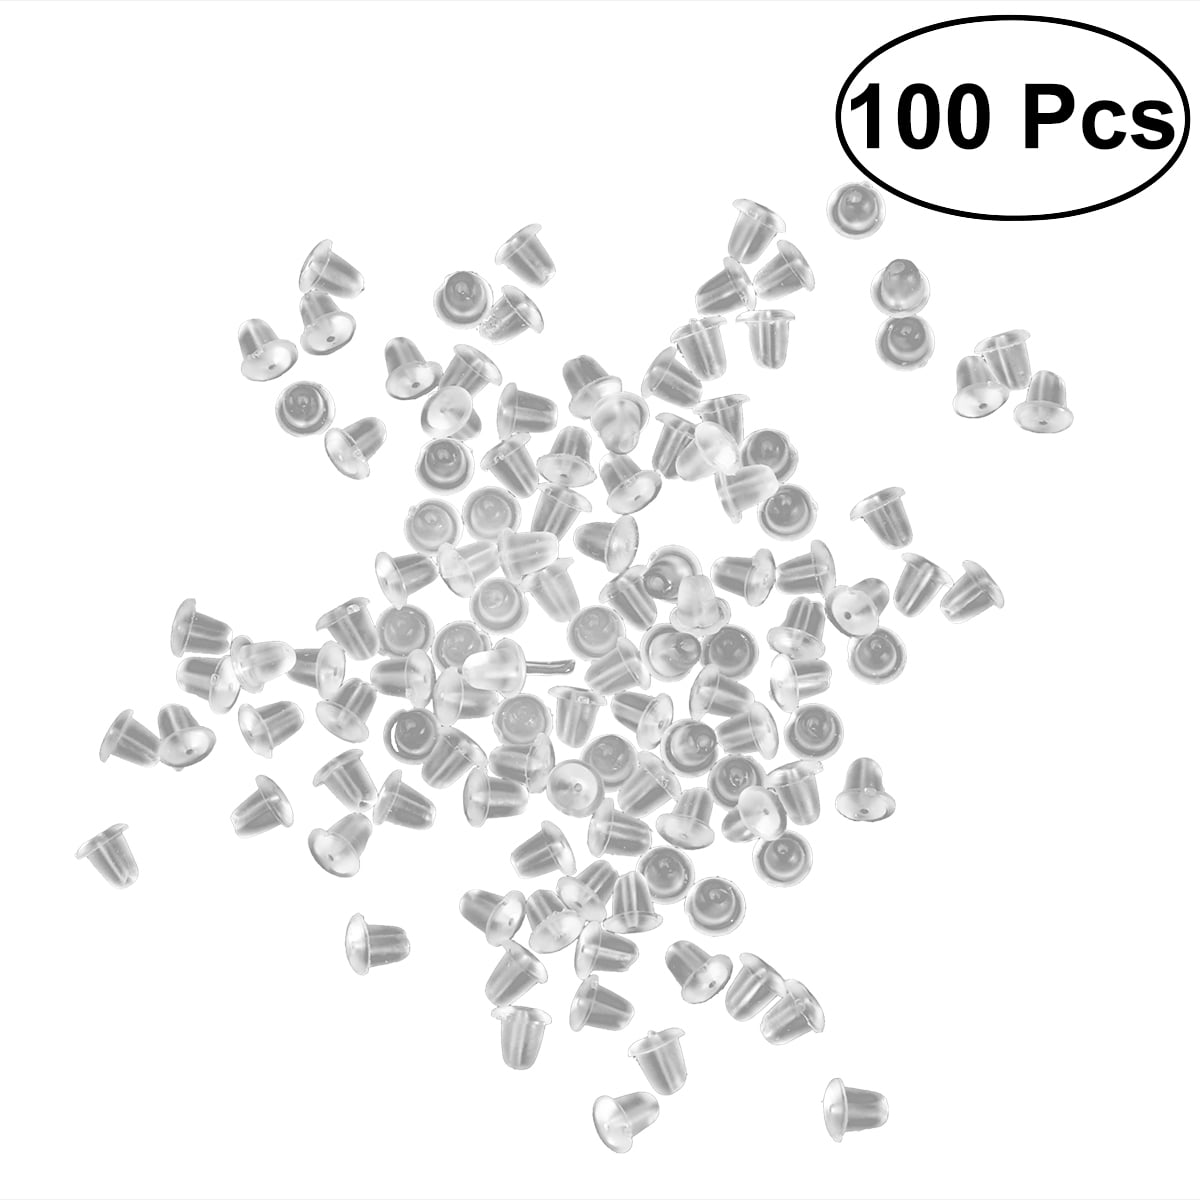 Amazon.com: 28Pcs Earring Backs for Studs, 14 Pairs Screw on Ear Backings  Replacement Butterfly Shape Safety Pierced Earrings Backs Small Earring  Stopper Locking for Studs Earrings Ear Nut for Post (Gold, Silver)